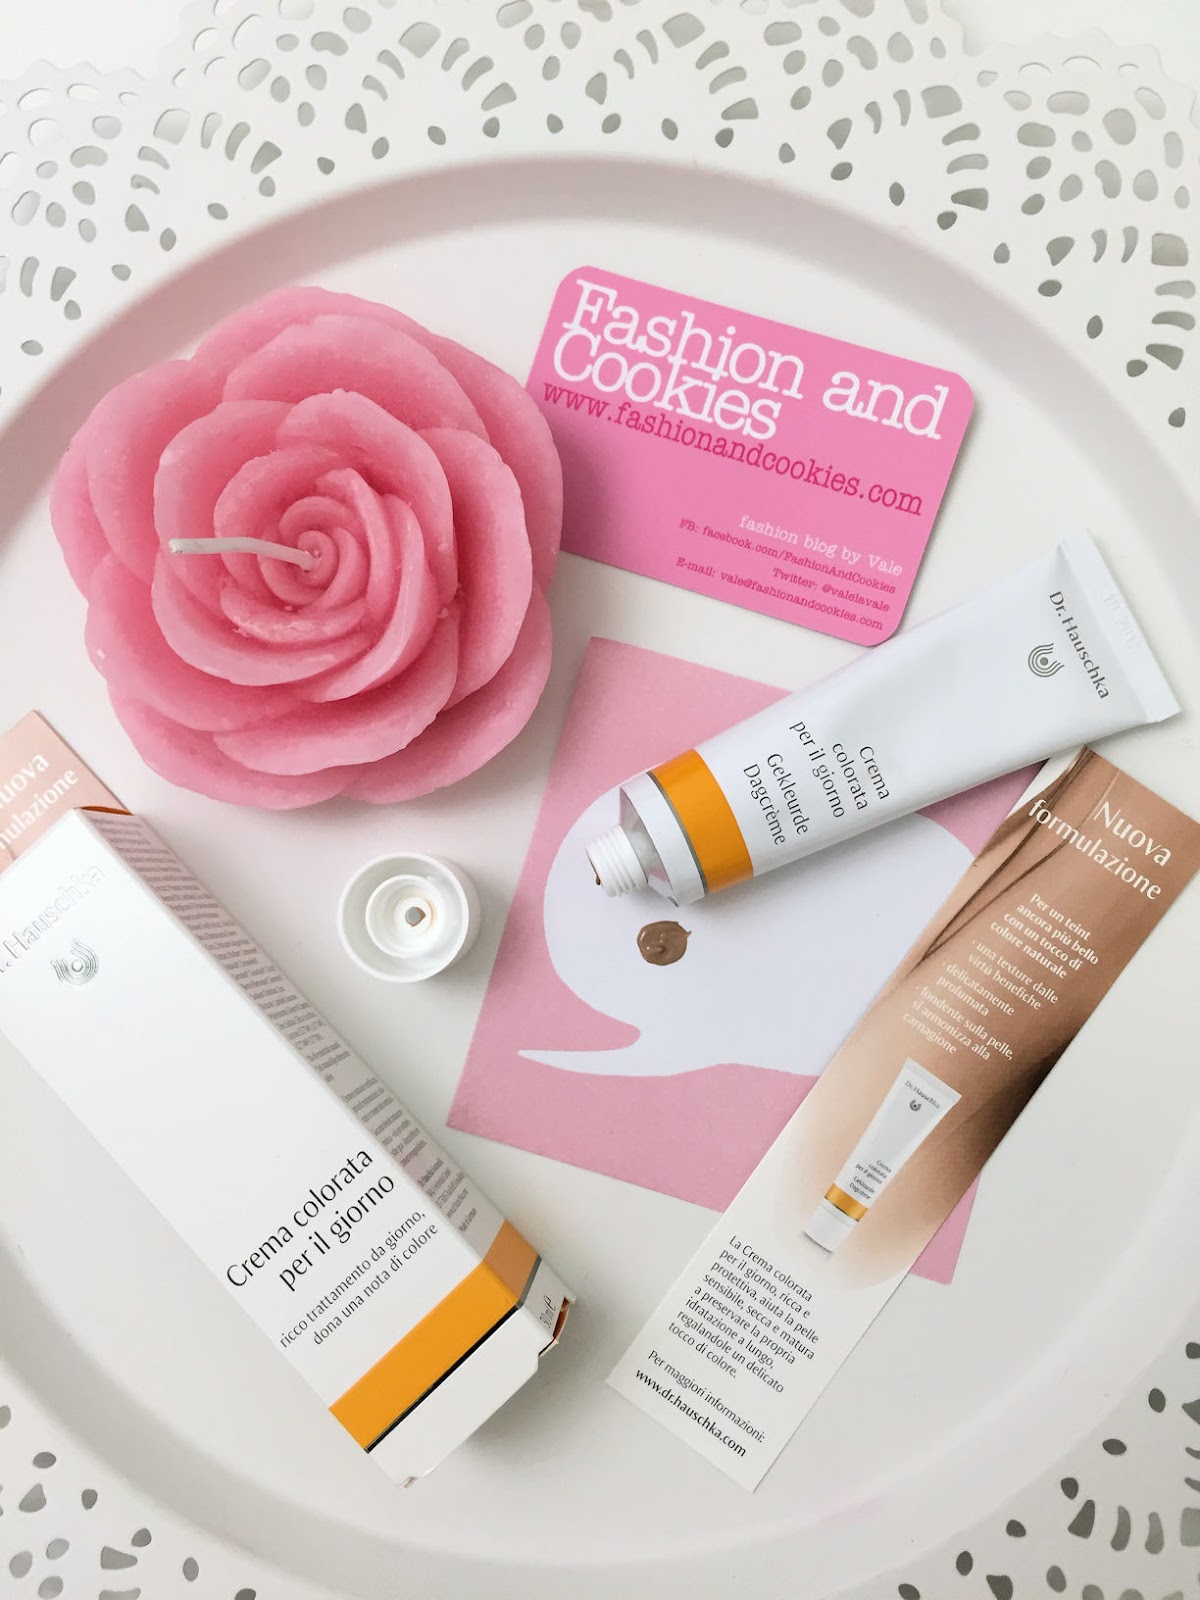 Dr. Hauschka tinted day cream new formula, crema colorata per il giorno, review on Fashion and Cookies beauty blog, beauty blogger